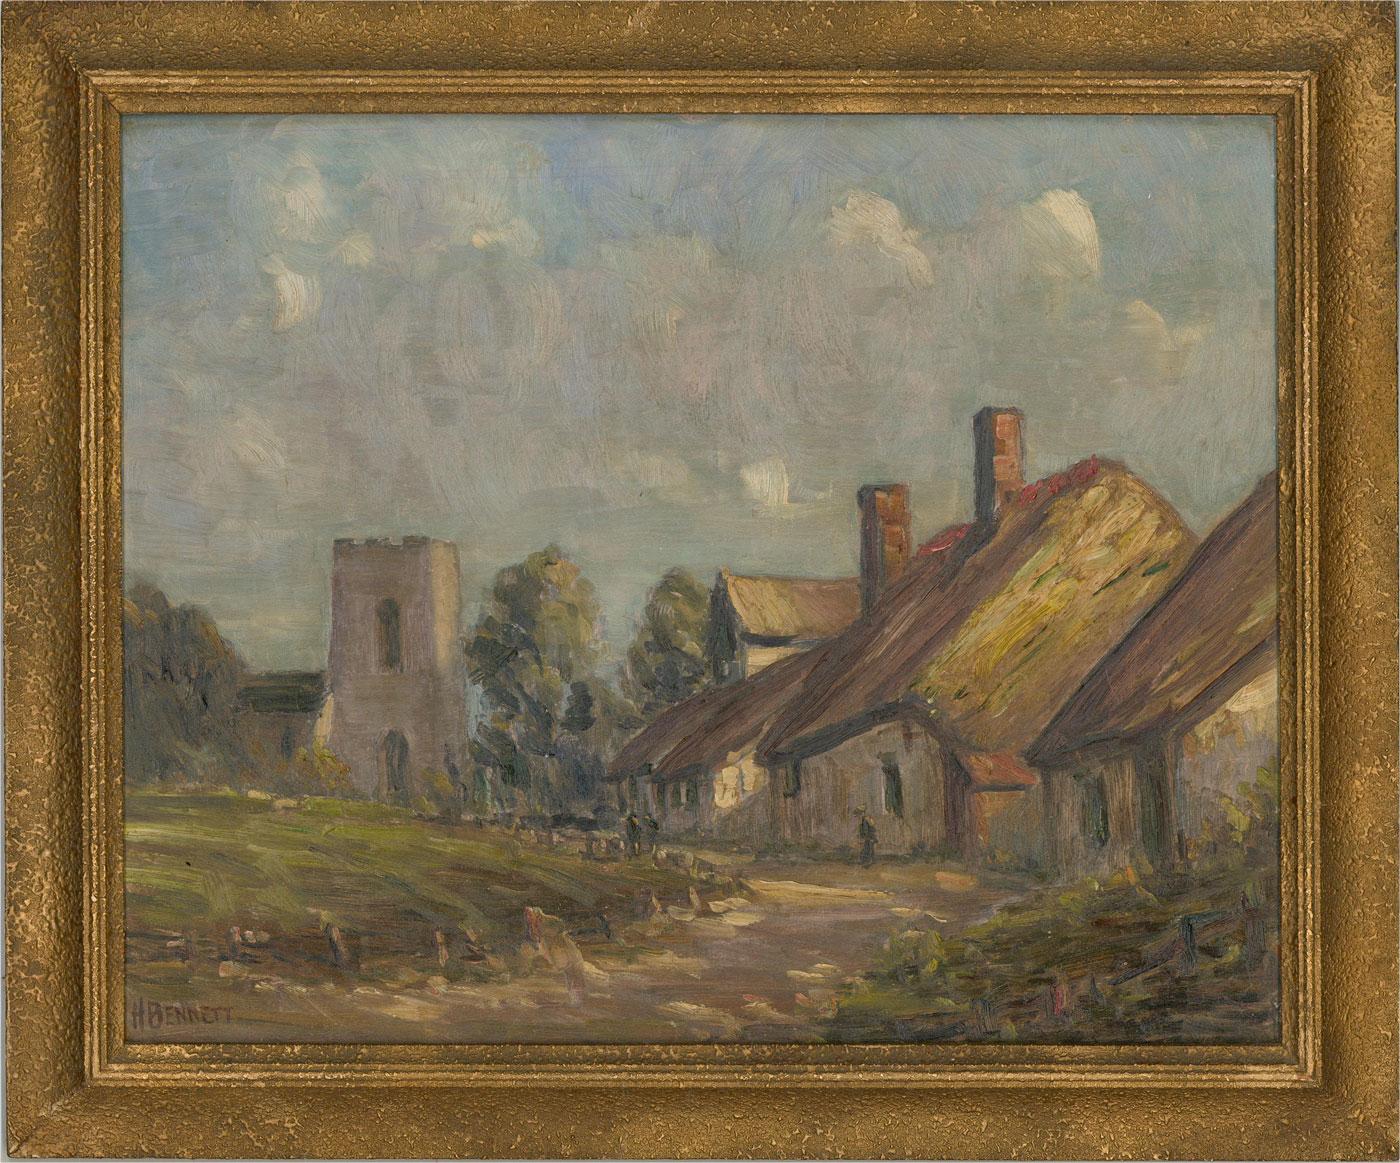 This painting depicts a quaint, rural village with figures wandering towards the church. The expressive brushstrokes are typical of Bennett's style. Well presented in a textured guilt effect frame. Signed to the lower left. On Board.
